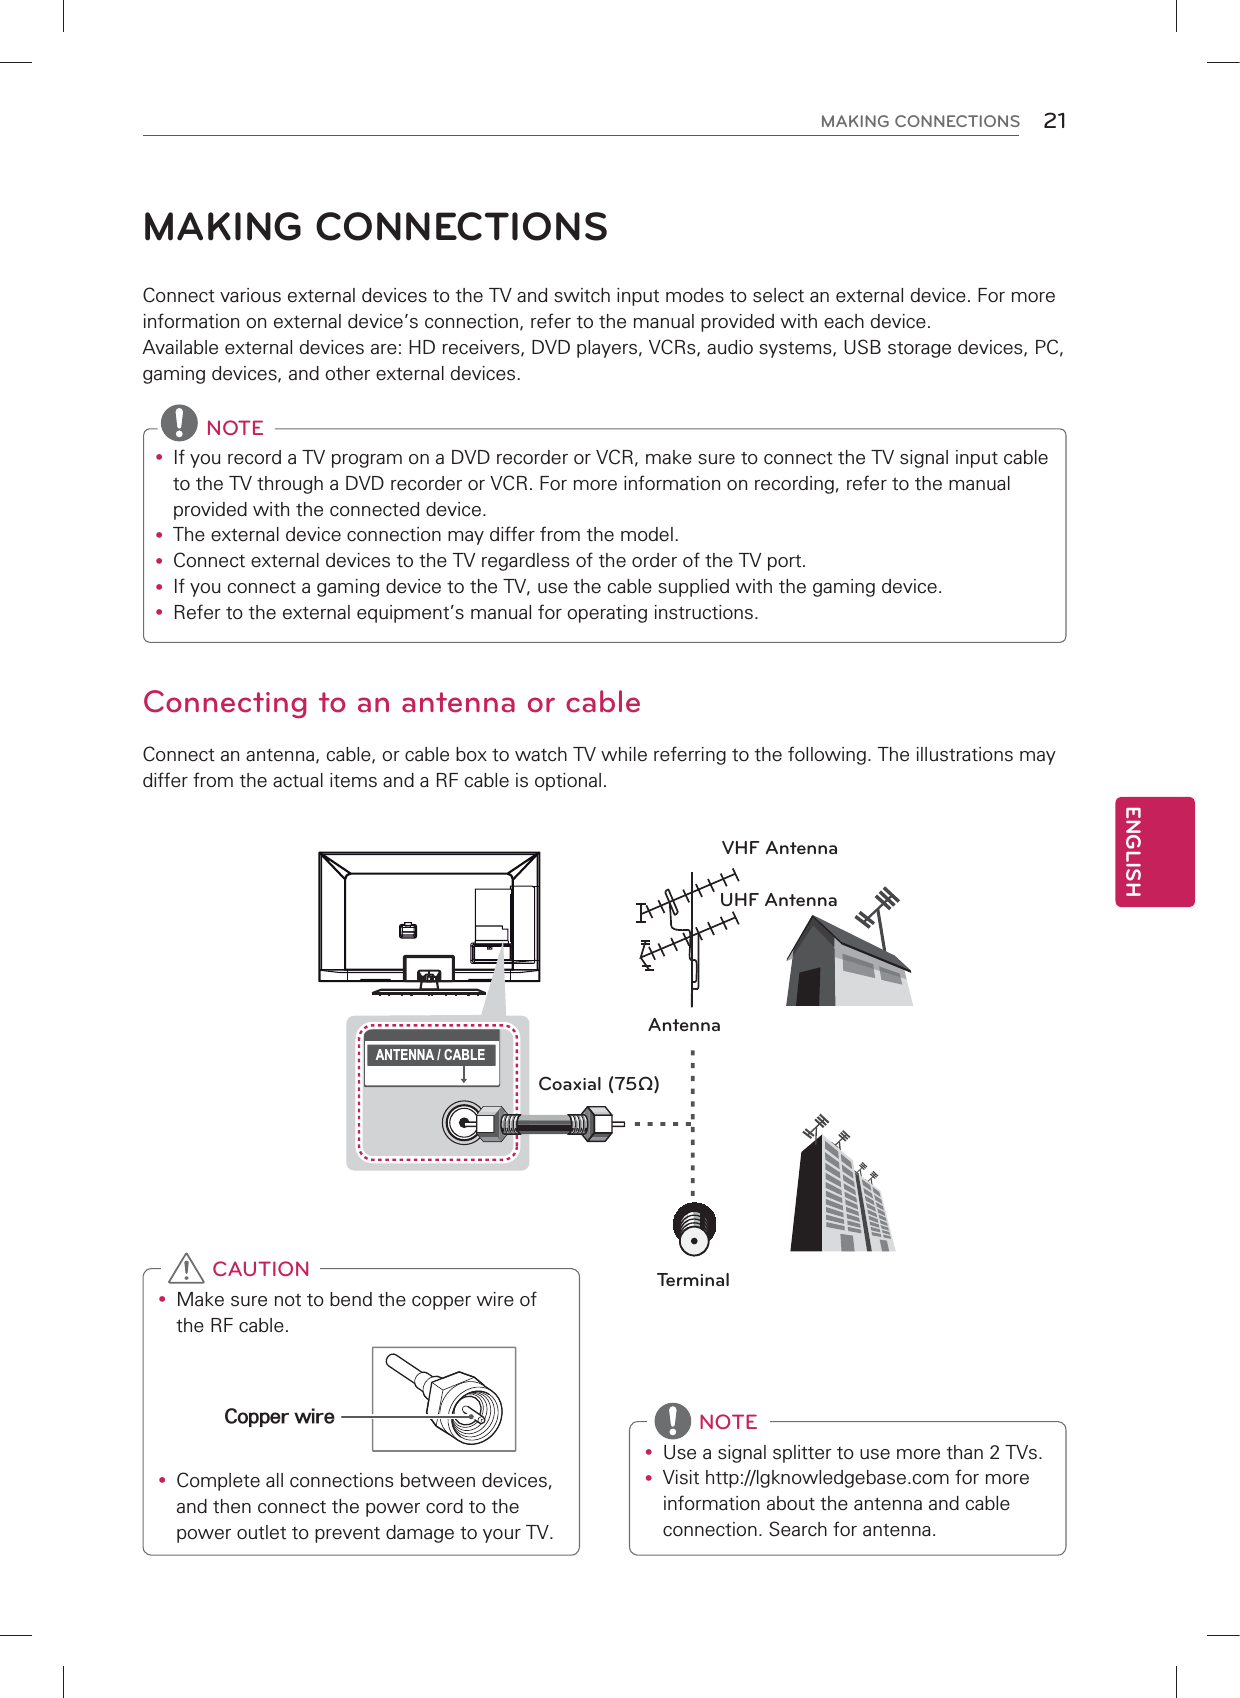 Connecting to an antenna or cableConnect an antenna, cable, or cable box to watch TV while referring to the following. The illustrations may differ from the actual items and a RF cable is optional. ANTENNA / CABLEVHF AntennaUHF AntennaAntennaTerminalCoaxial (75Ω)MAKING CONNECTIONSConnect various external devices to the TV and switch input modes to select an external device. For more information on external device’s connection, refer to the manual provided with each device.Available external devices are: HD receivers, DVD players, VCRs, audio systems, USB storage devices, PC, gaming devices, and other external devices. NOTEy If you record a TV program on a DVD recorder or VCR, make sure to connect the TV signal input cable to the TV through a DVD recorder or VCR. For more information on recording, refer to the manual provided with the connected device.y The external device connection may differ from the model.y Connect external devices to the TV regardless of the order of the TV port.y If you connect a gaming device to the TV, use the cable supplied with the gaming device.y Refer to the external equipment’s manual for operating instructions.y Make sure not to bend the copper wire of the RF cable.Copper wirey Complete all connections between devices, and then connect the power cord to the power outlet to prevent damage to your TV. CAUTIONy Use a signal splitter to use more than 2 TVs.y Visit http://lgknowledgebase.com for more information about the antenna and cable connection. Search for antenna. NOTEENGLISH21MAKING CONNECTIONS